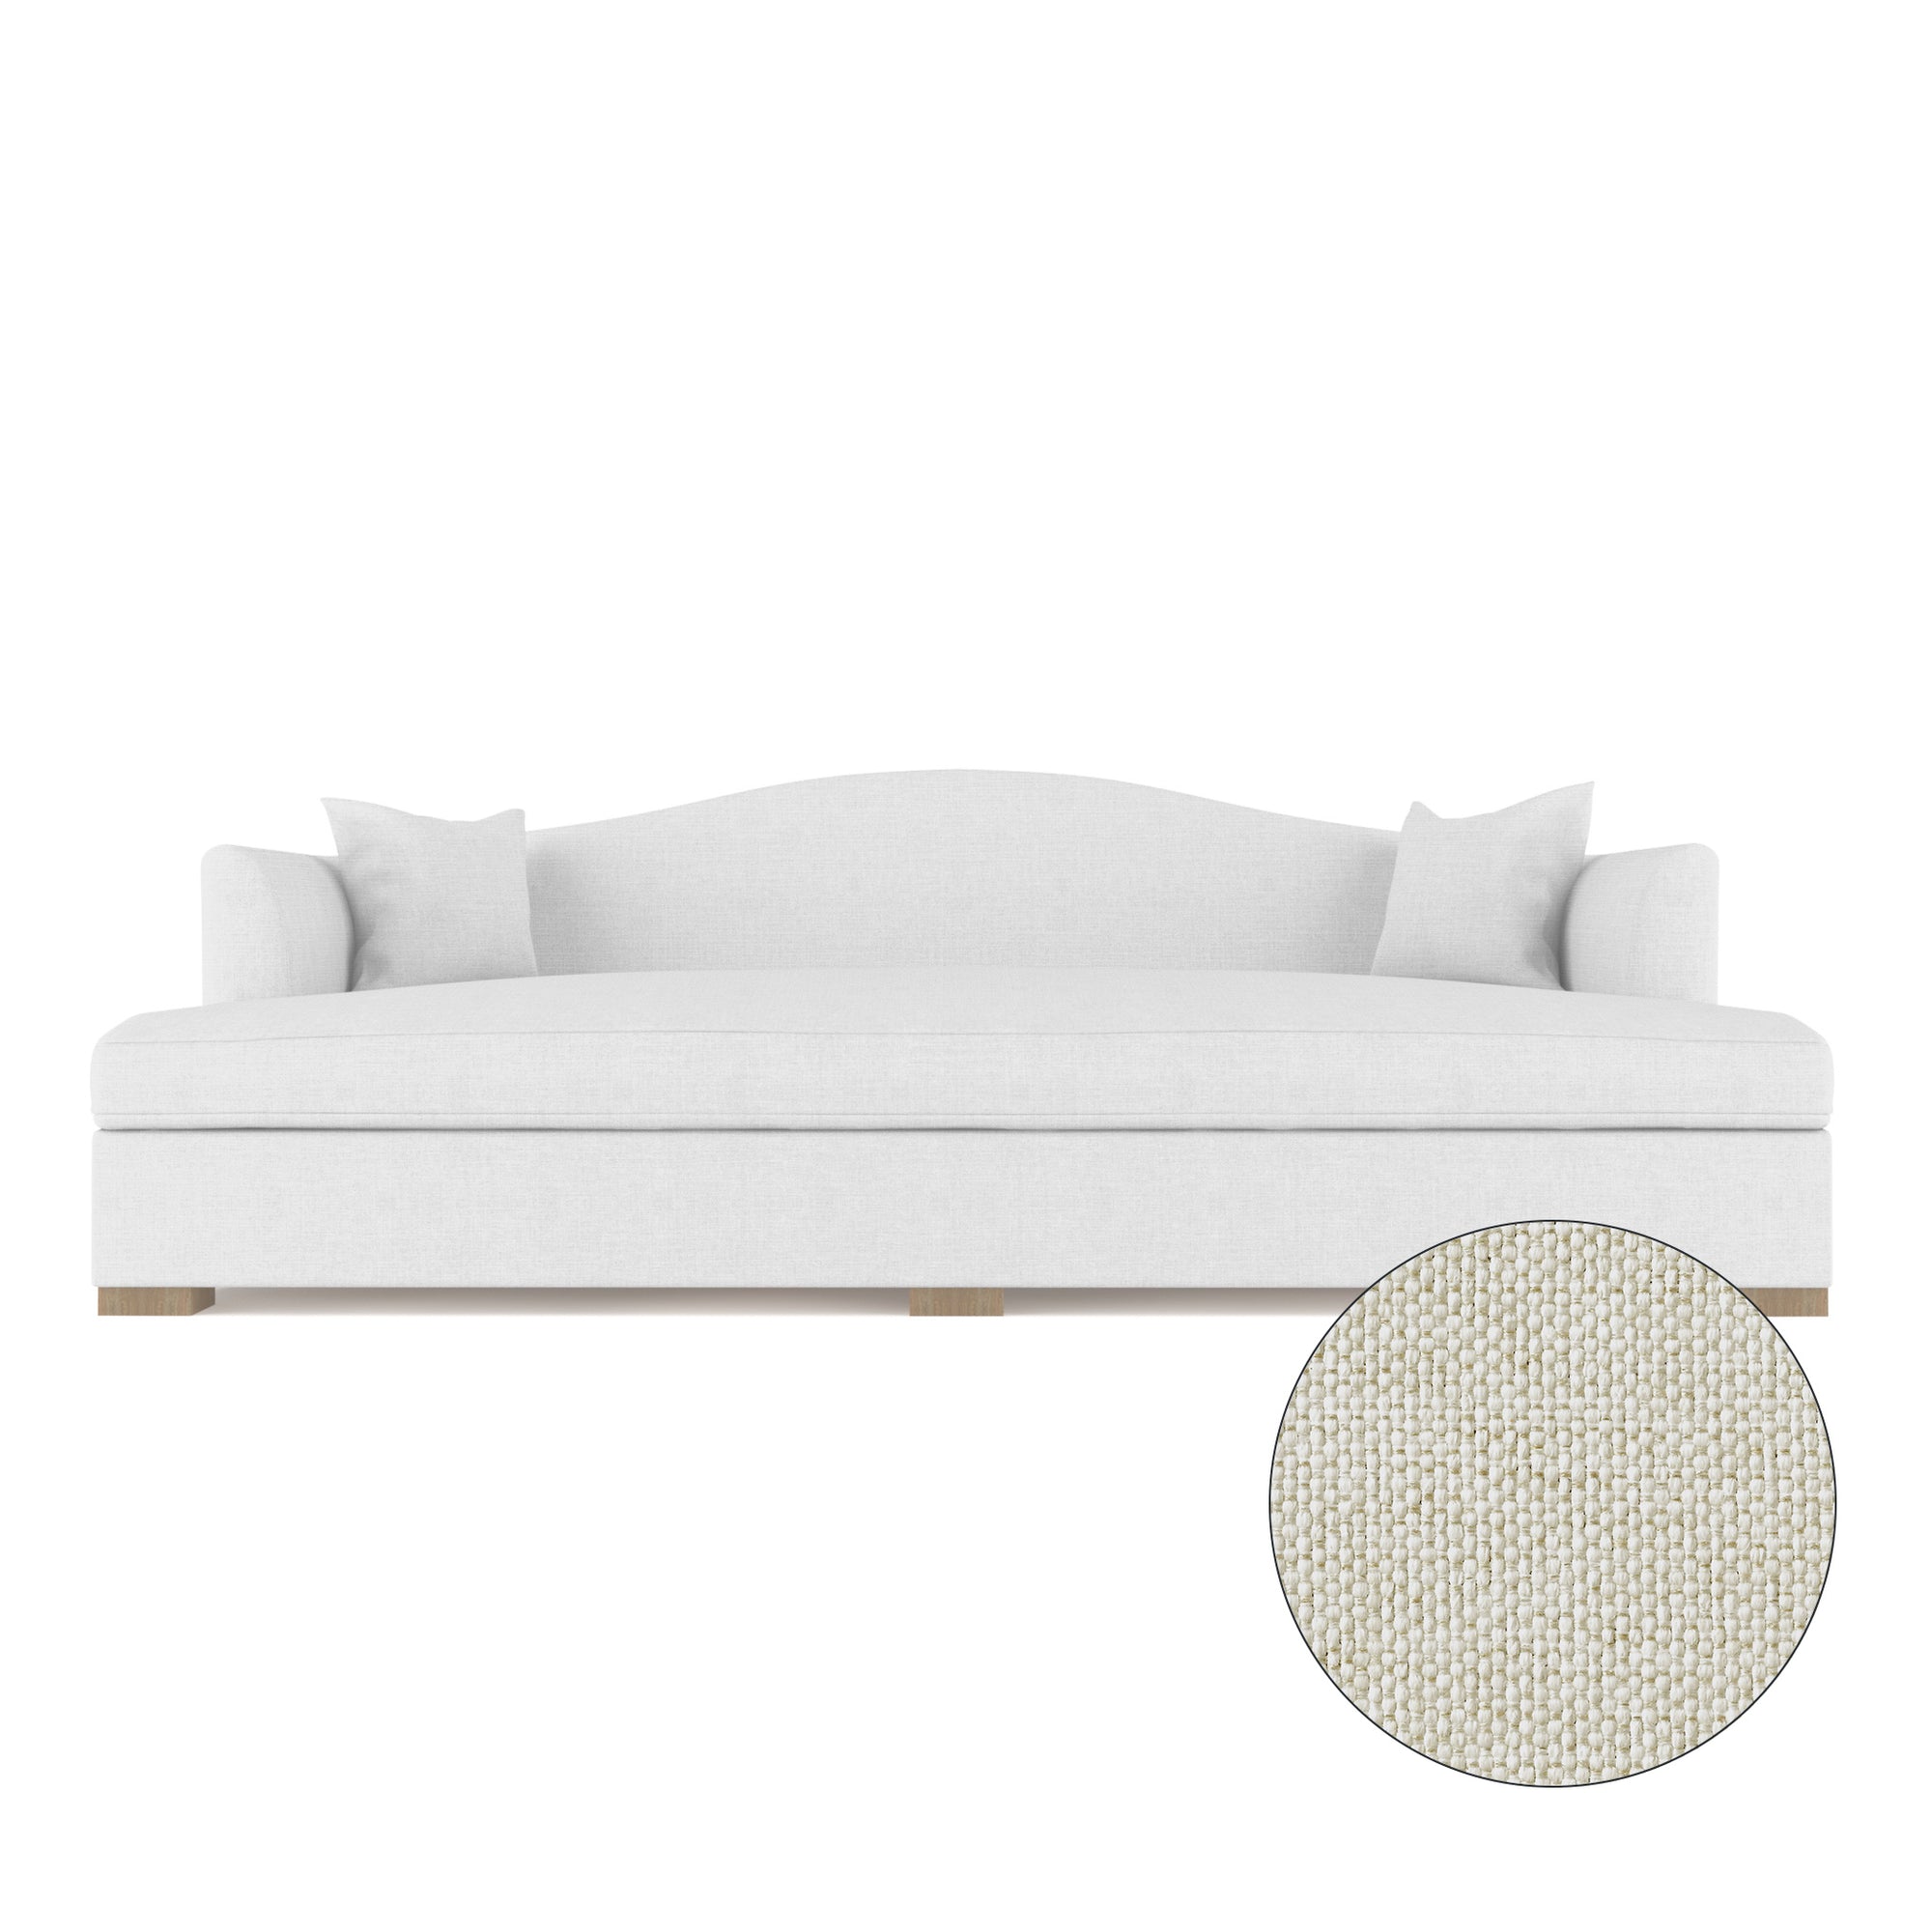 Horatio Daybed - Alabaster Pebble Weave Linen